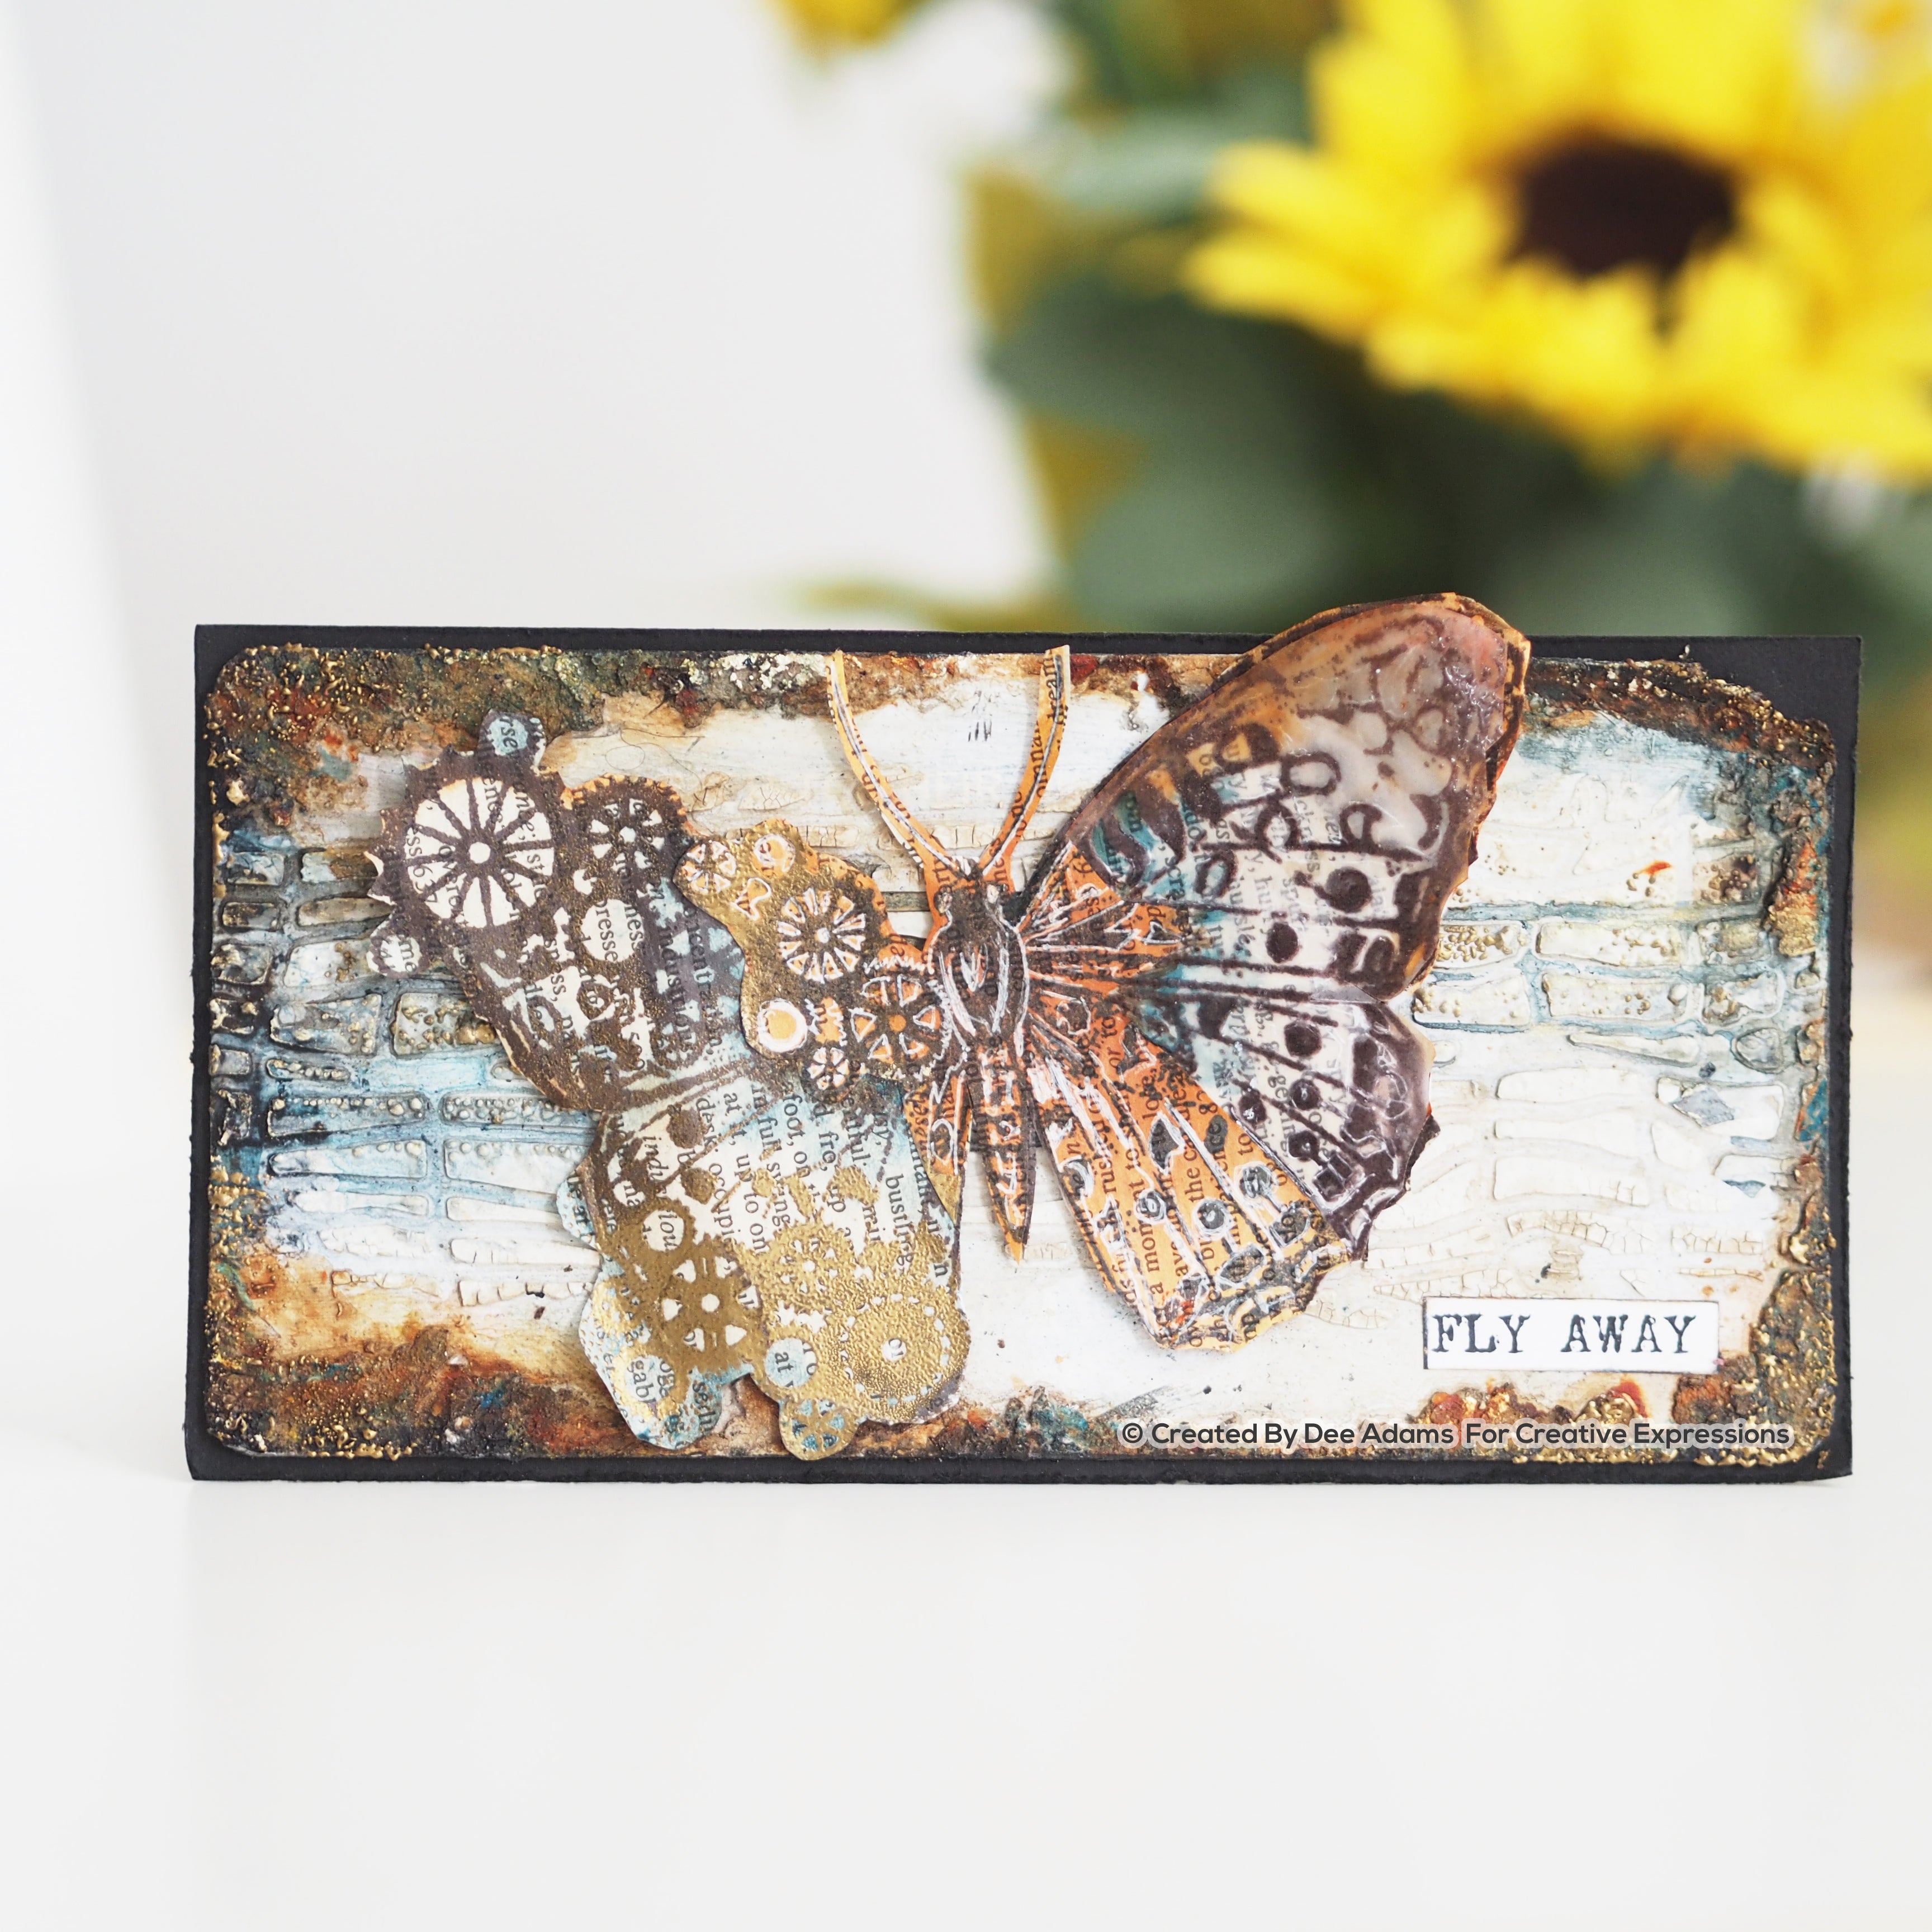 Woodware Clear Singles Butterfly 4 in x 6 in Stamp